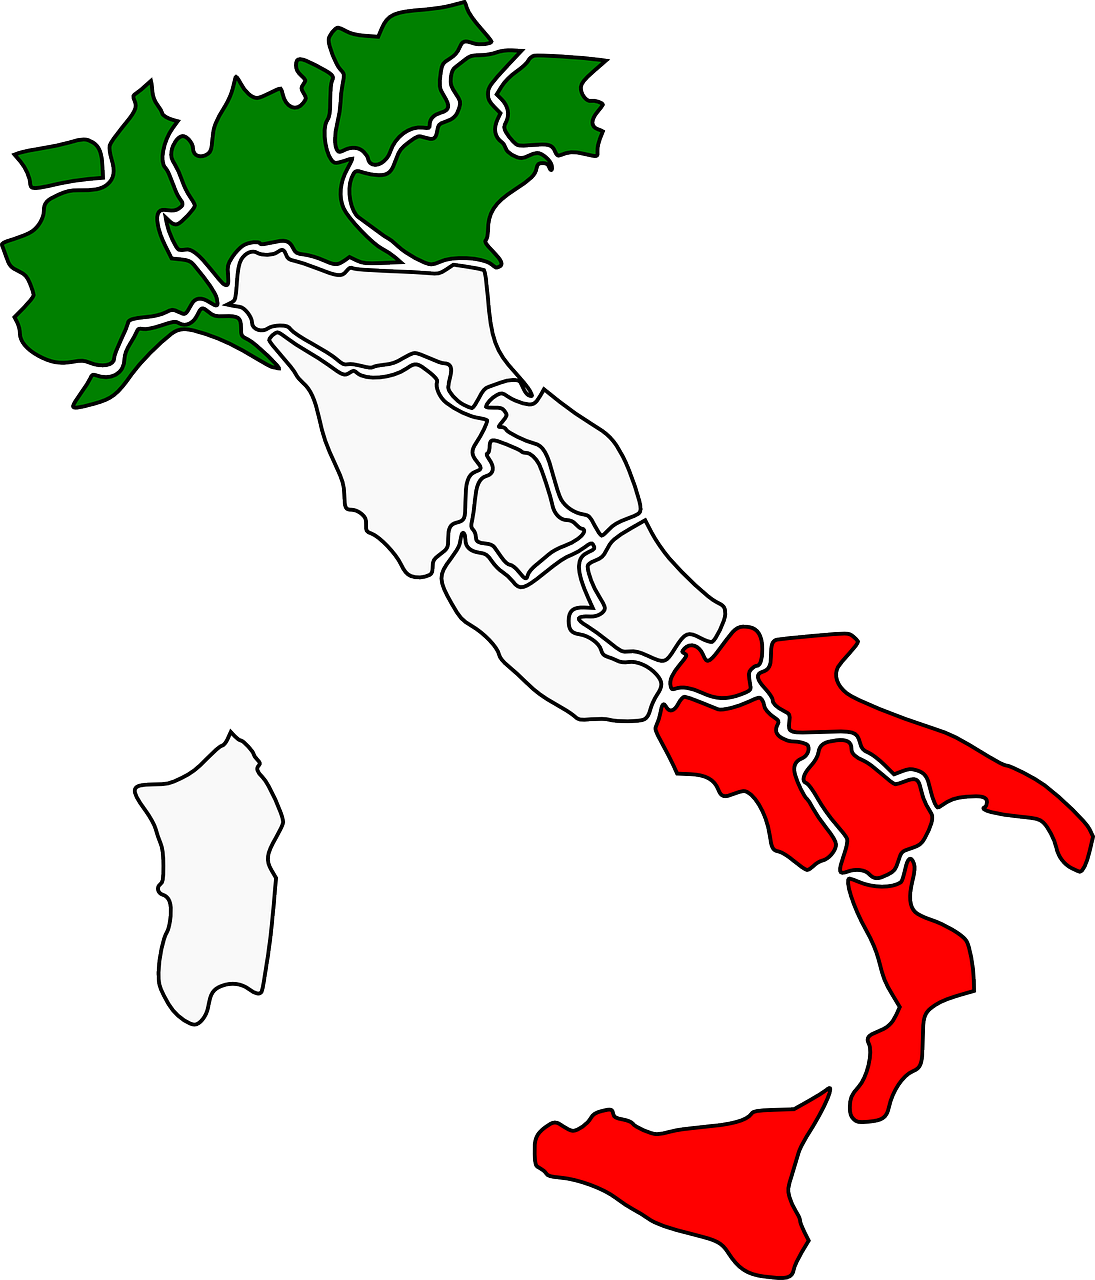 italy-g9a21ad324_1280.png